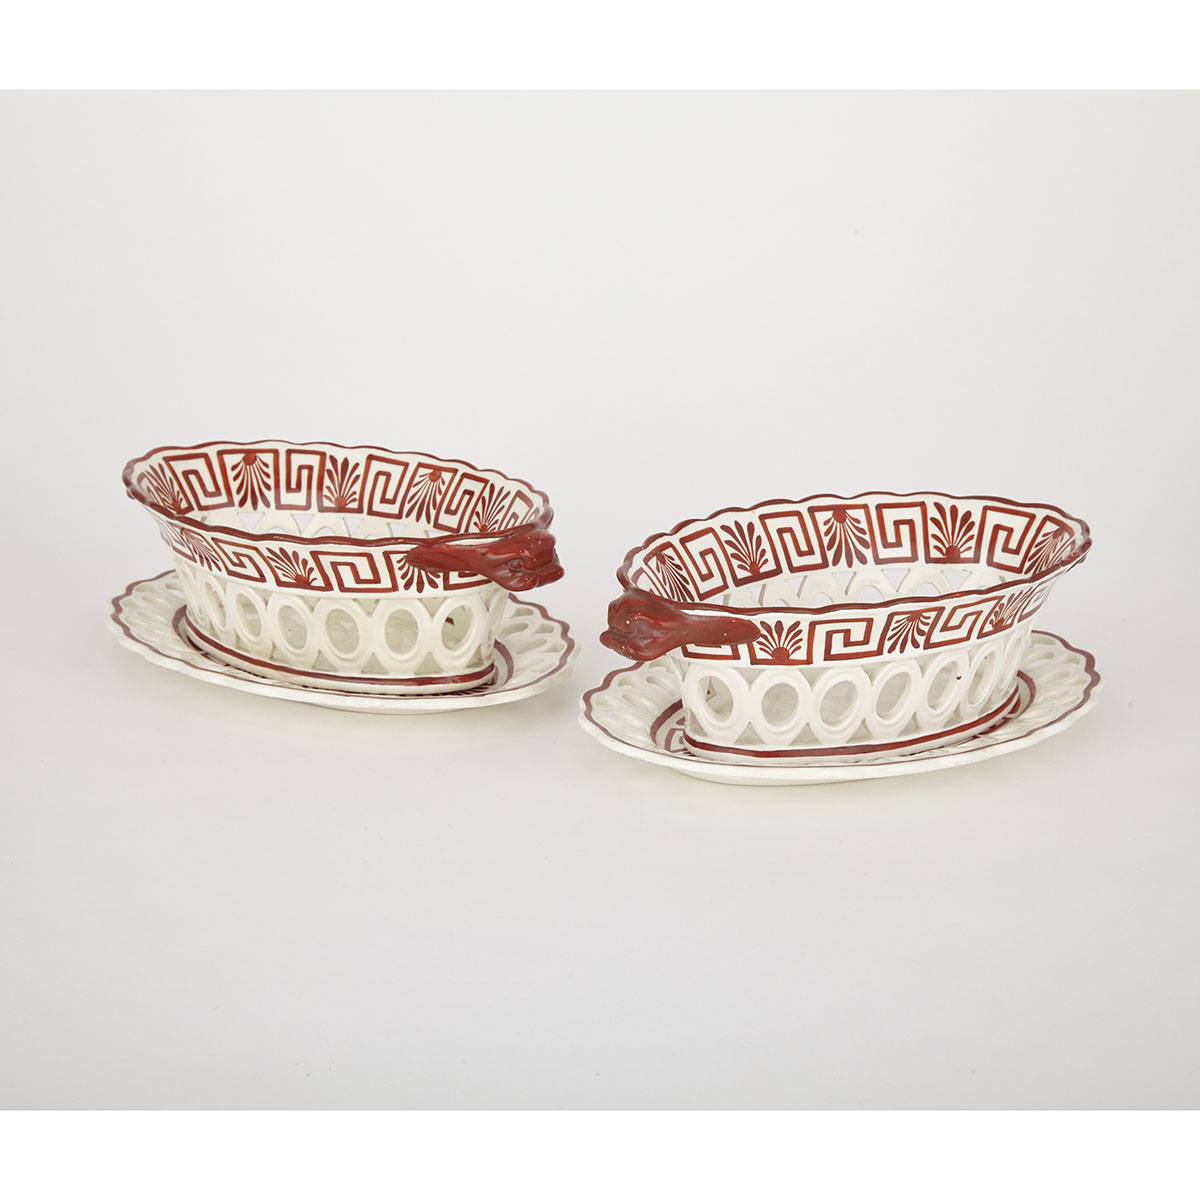 Pair of Spode Creamware Oval Baskets and Stands, c.1810 